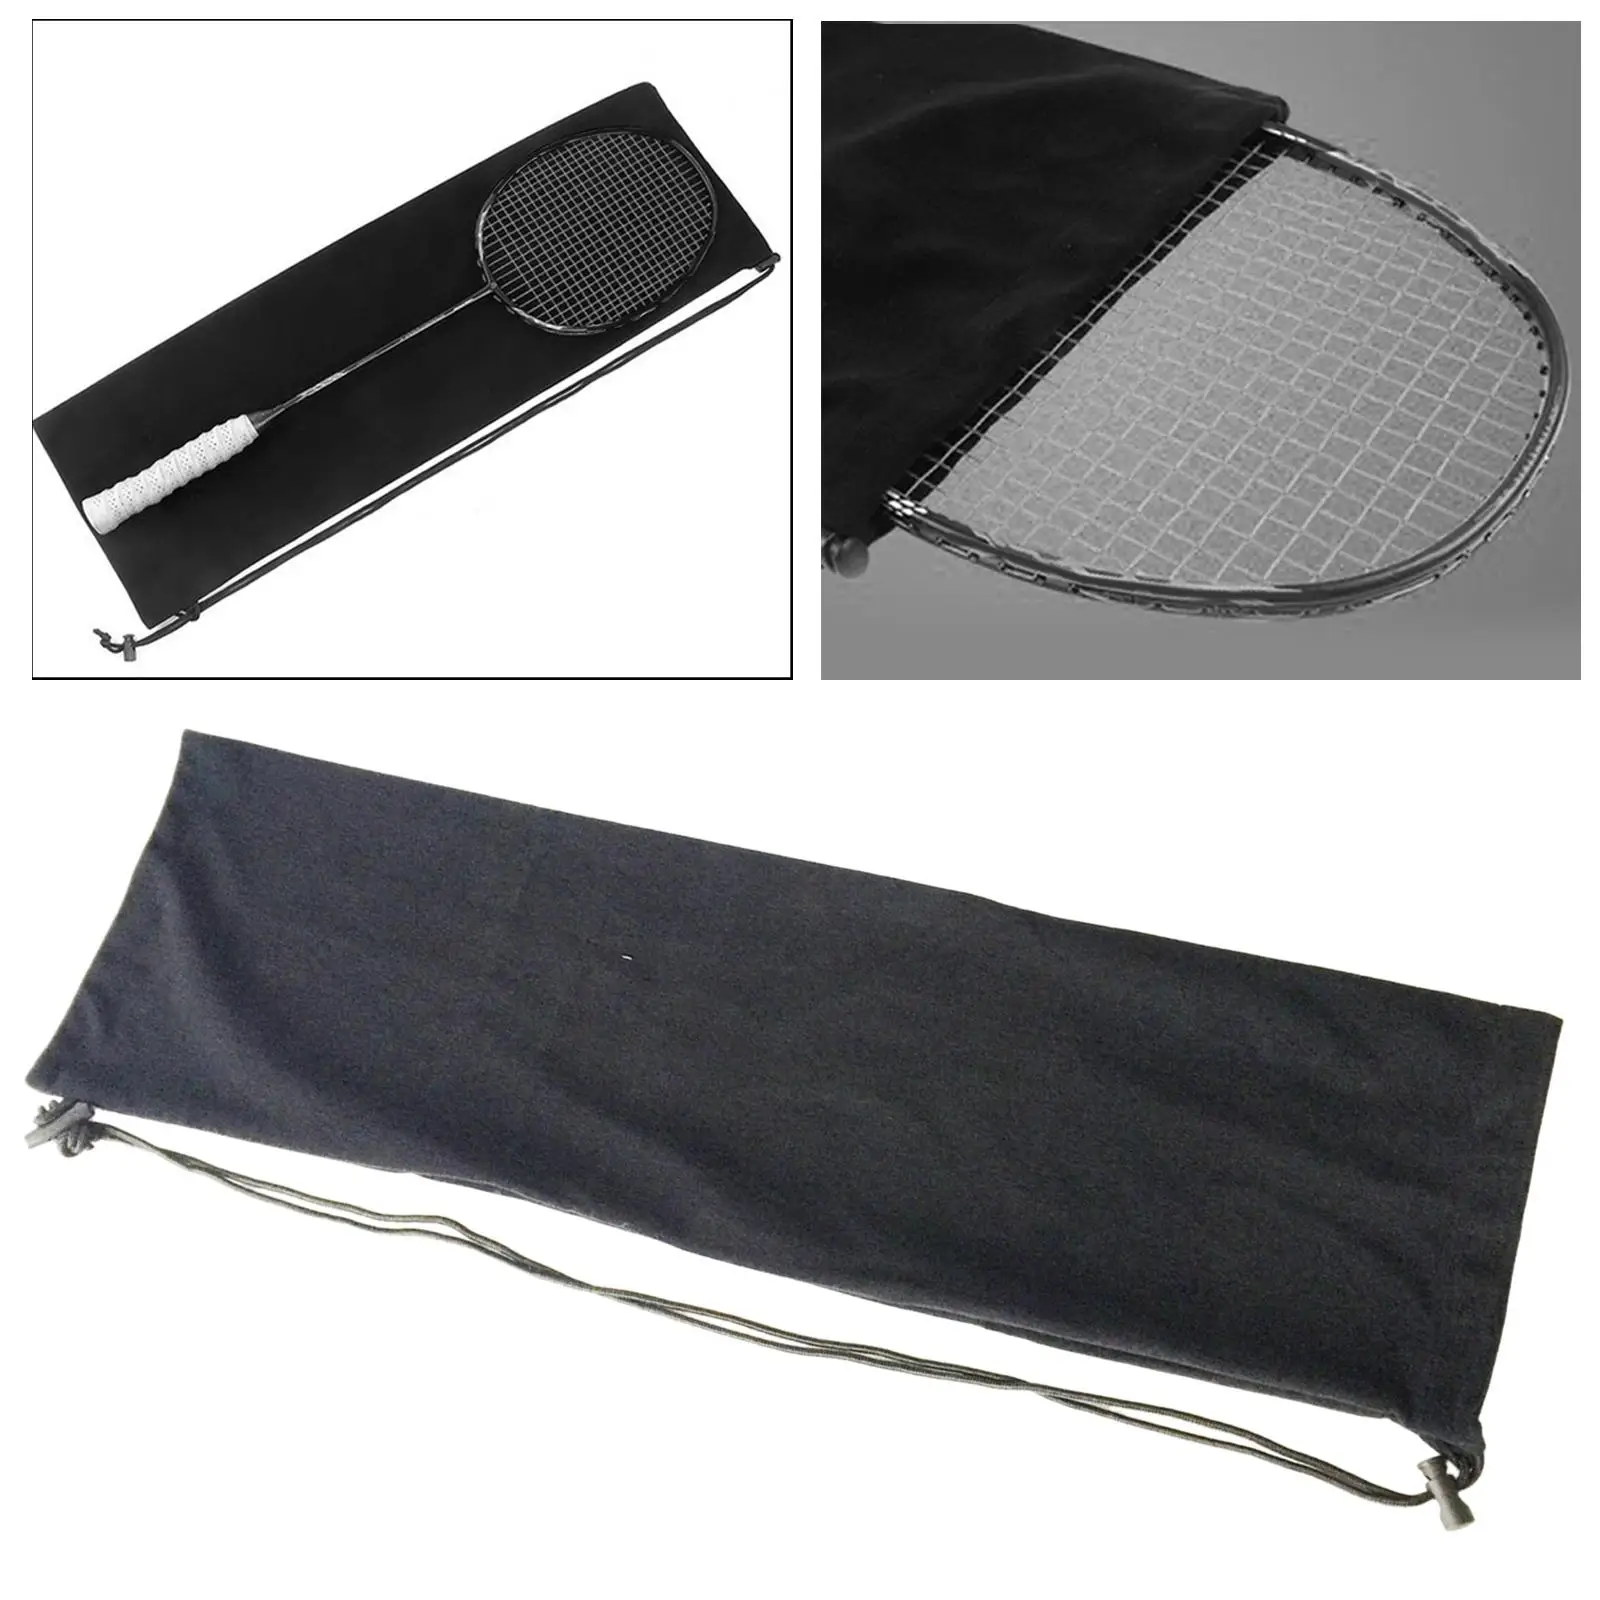 Portable Badminton Racket Cover Bag Storage Bag Soft Protective Case Carrier Lightweight Pouch for Tennis Players Outdoor Sports